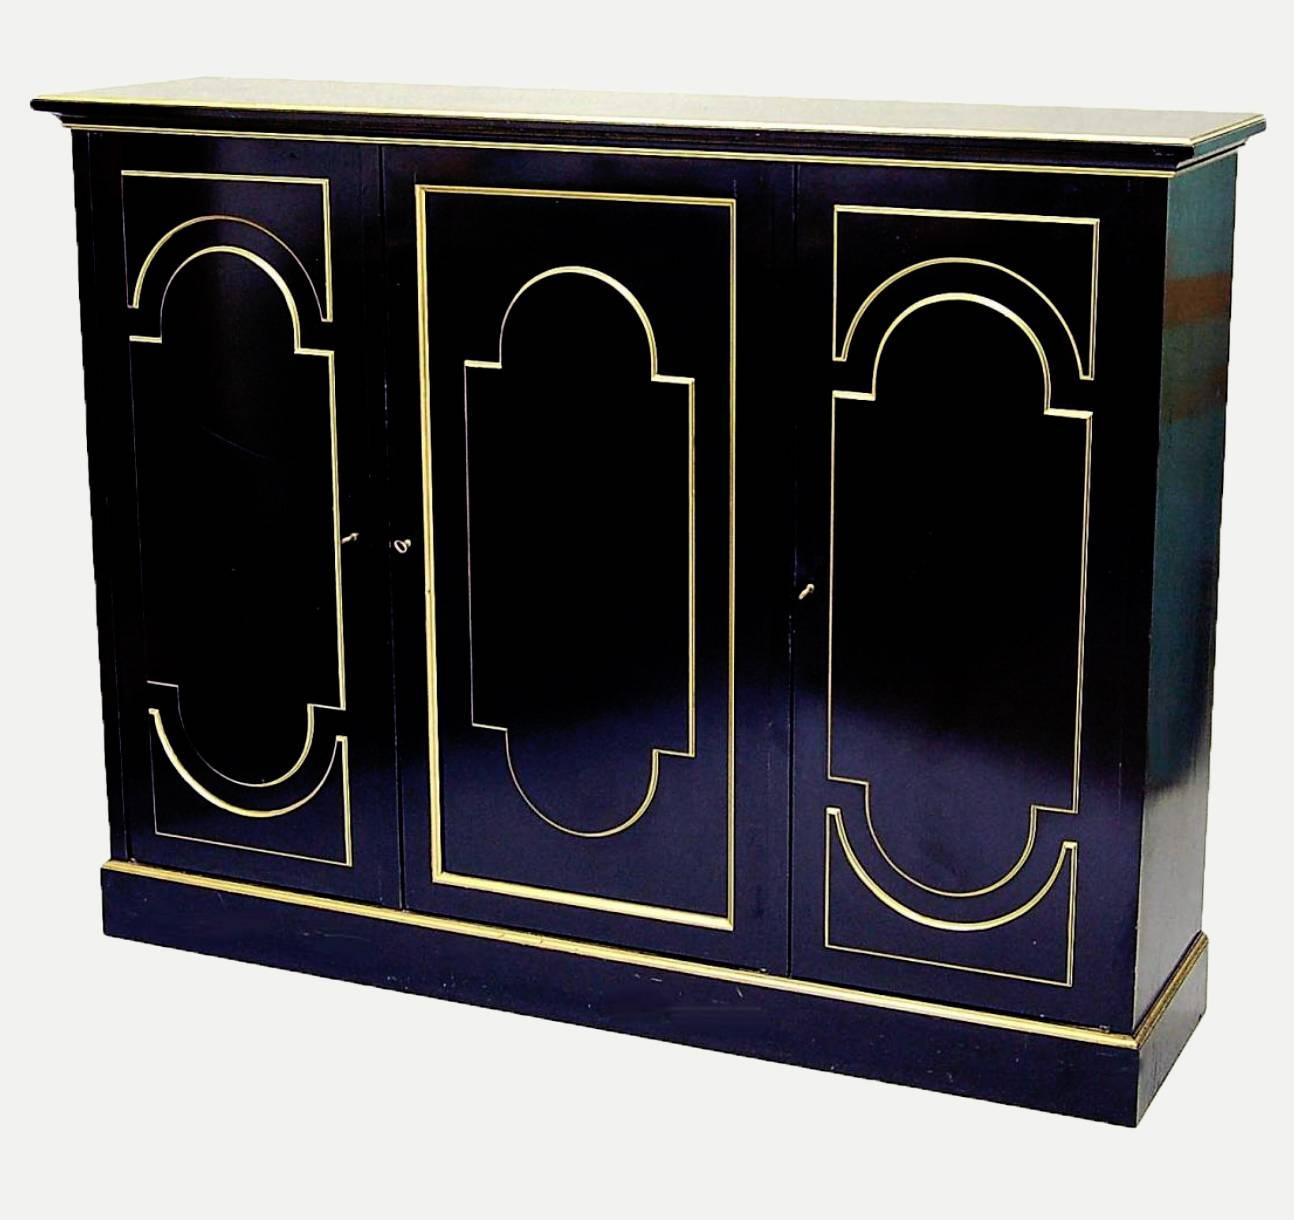 This luxurious cabinet is signed by neoclassical designer Maurice Hirsch. Typical of the designer, the piece was inspired by the nineteenth century, albeit with a contemporary twist. Rich, dark wood makes up the body of the cabinet, and it’s been